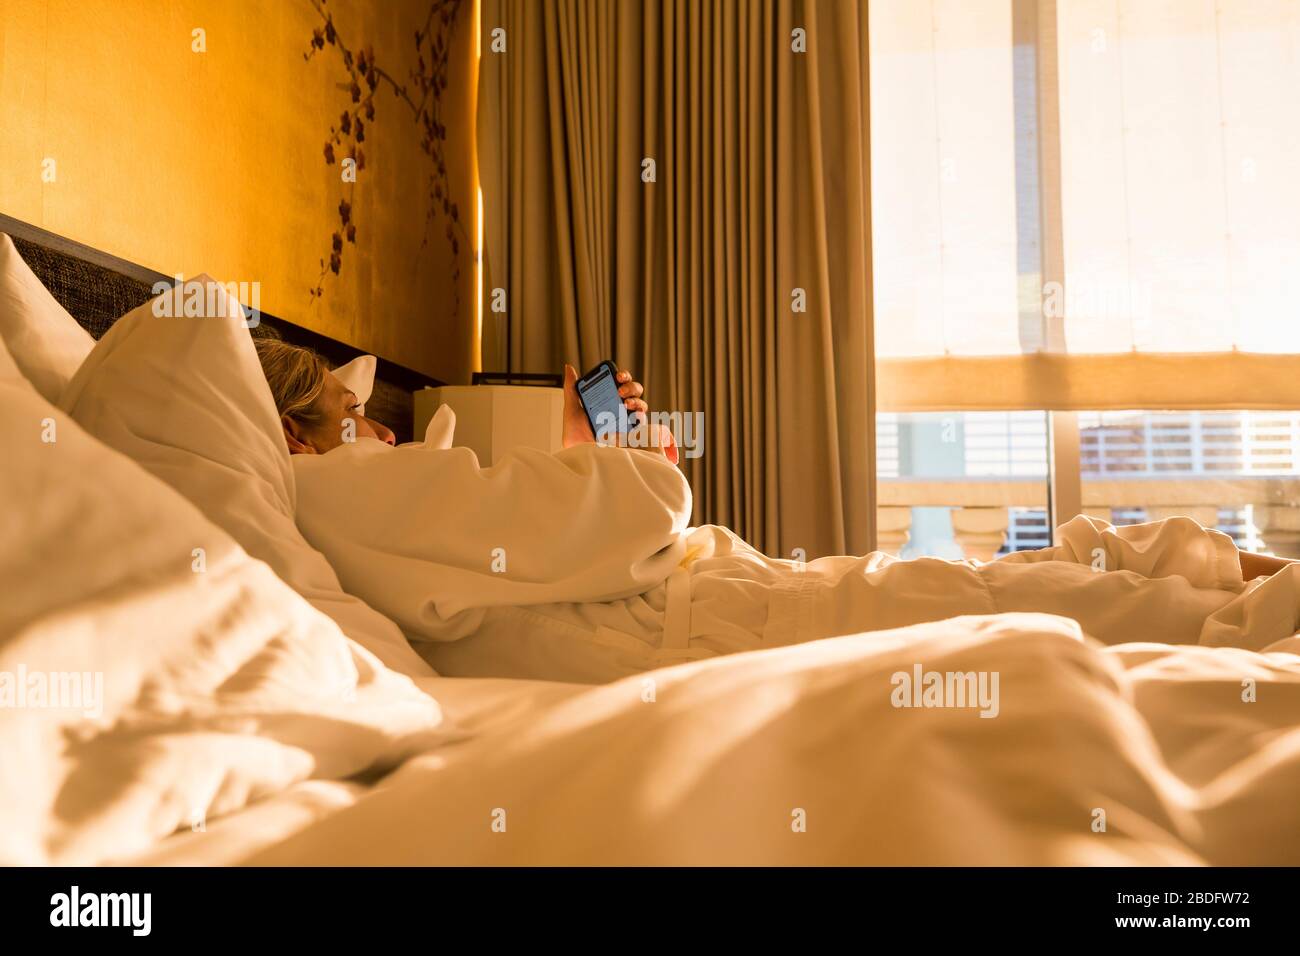 Adult woman executive lying on hotel bed in early morning sunlight, looking at smart phone Stock Photo